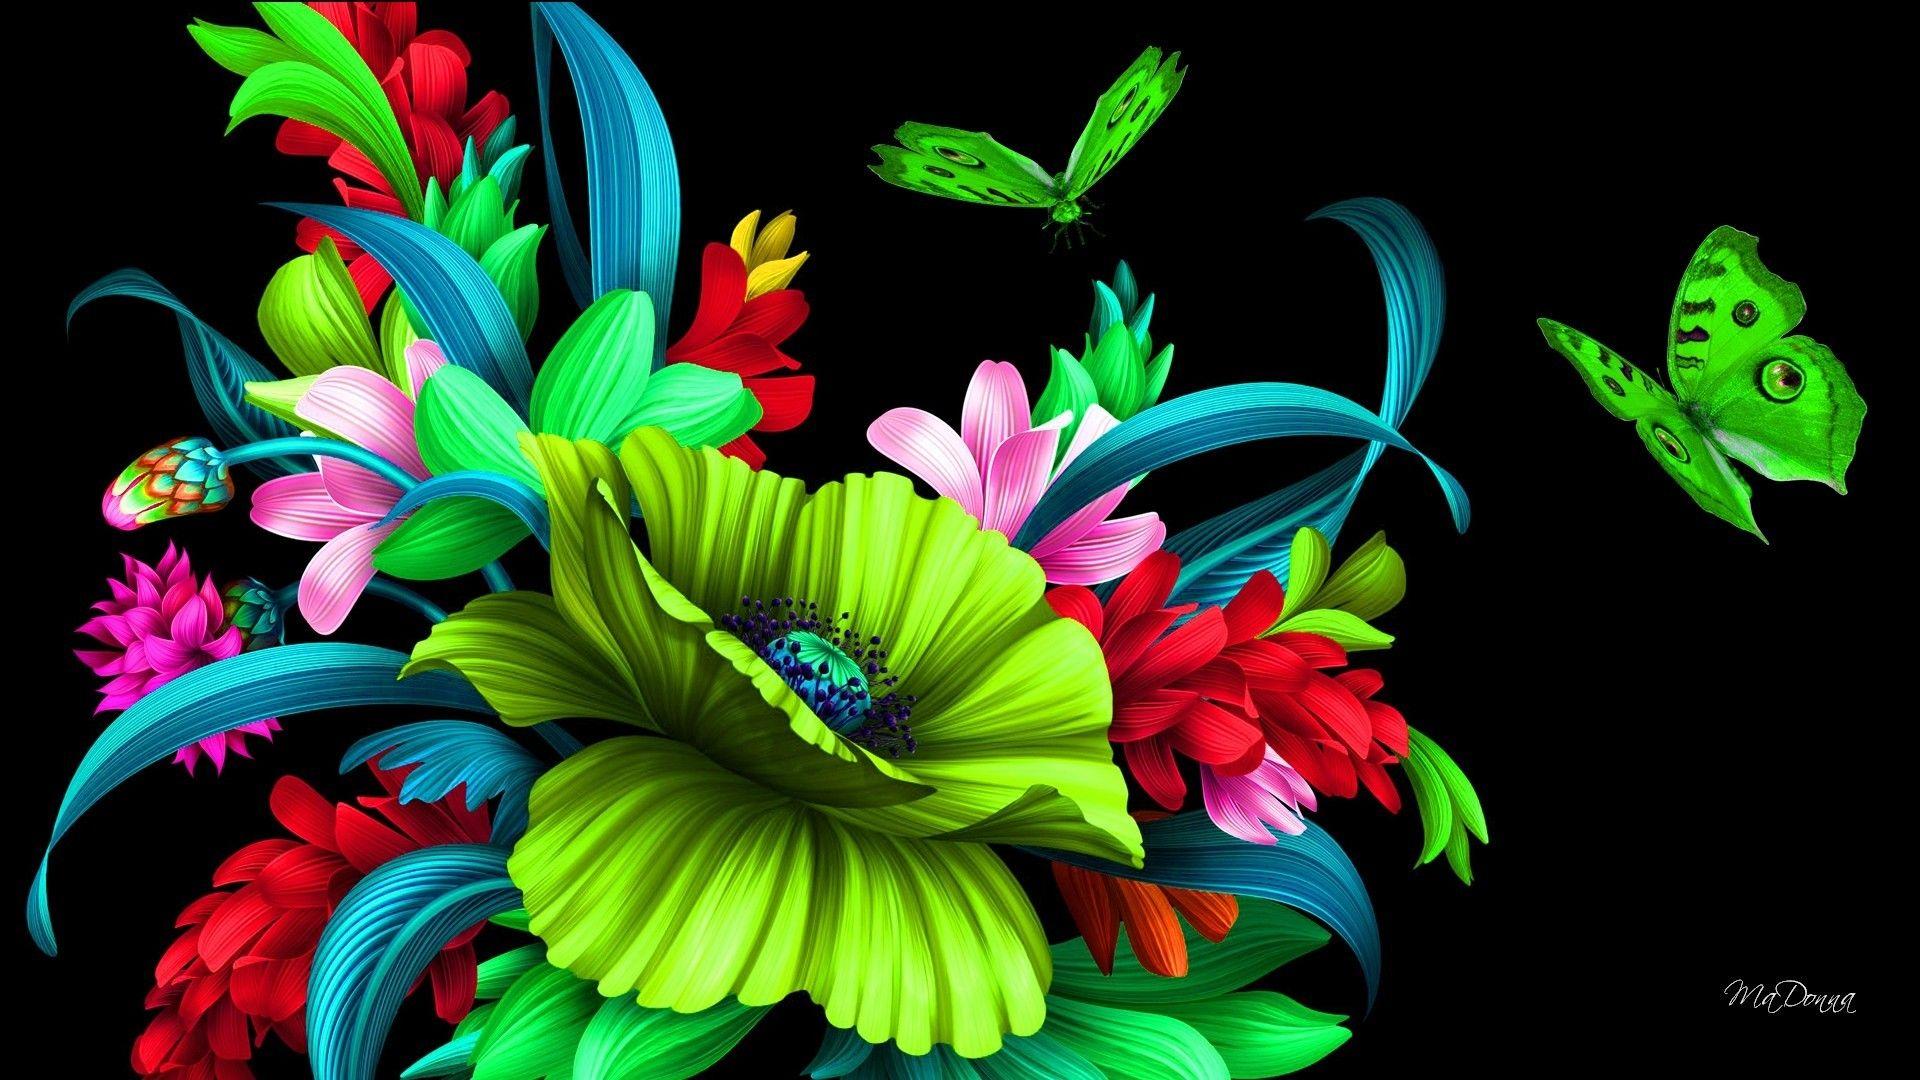 Neon Flowers Wallpapers - Top Free Neon Flowers Backgrounds - WallpaperAccess